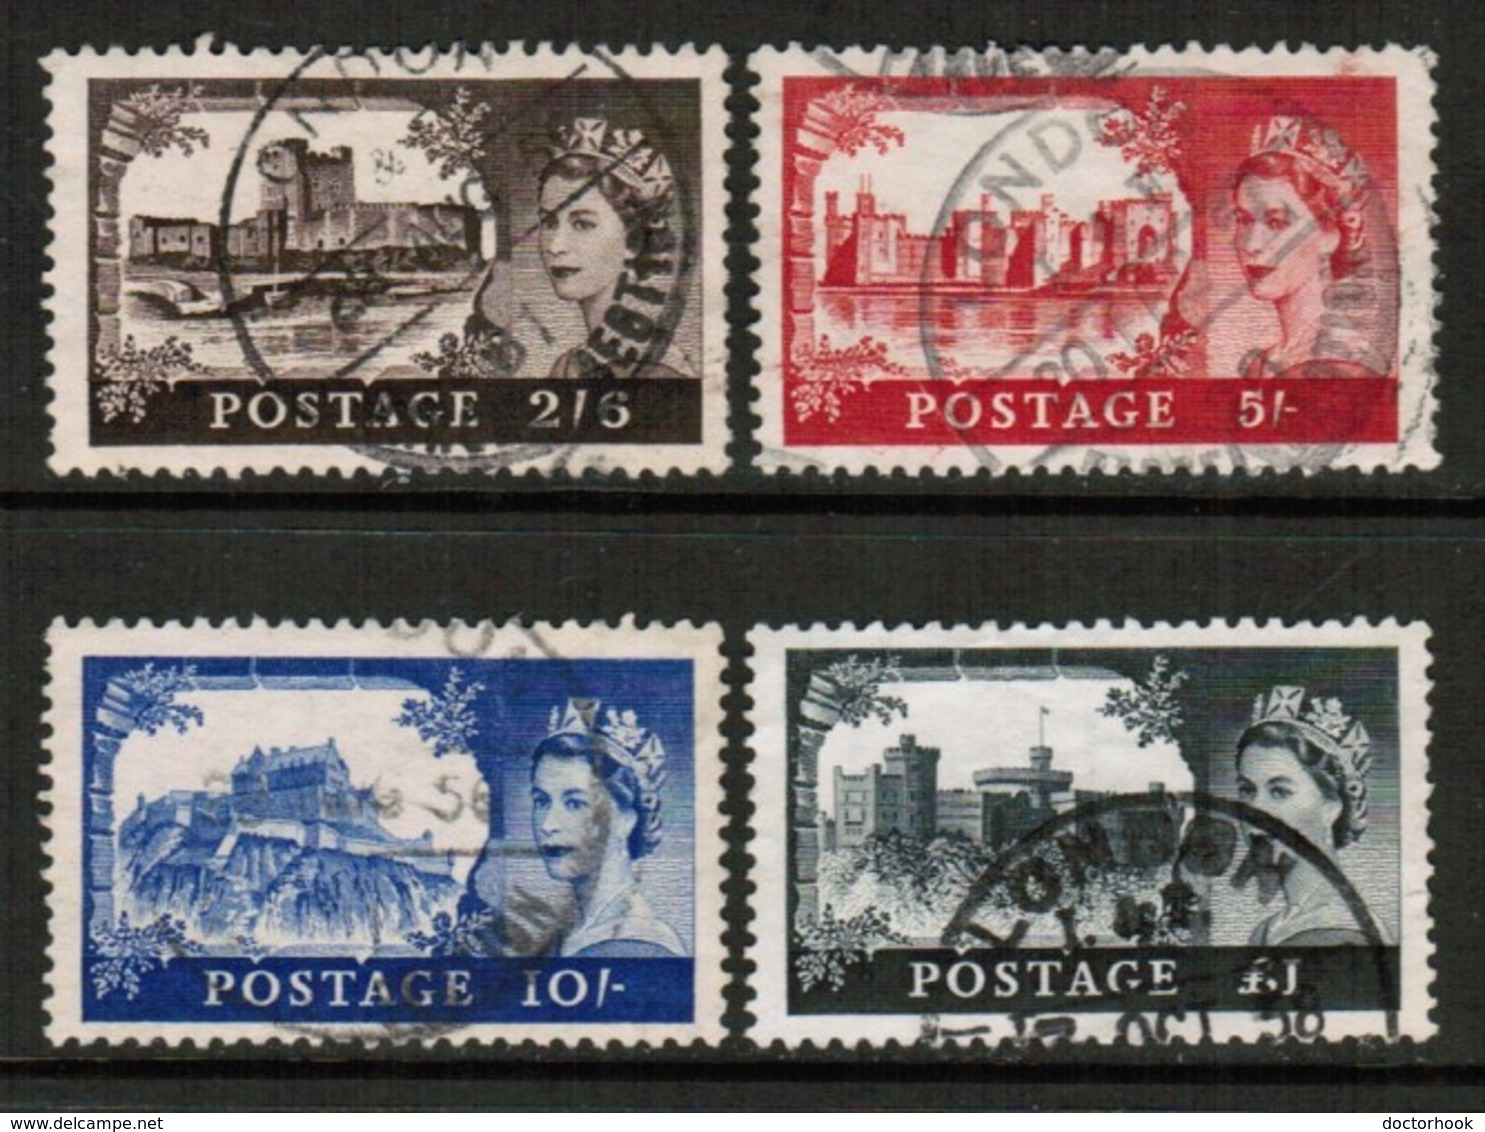 GREAT BRITAIN  Scott # 309-12 VF USED  (Stamp Scan # 515) - Used Stamps